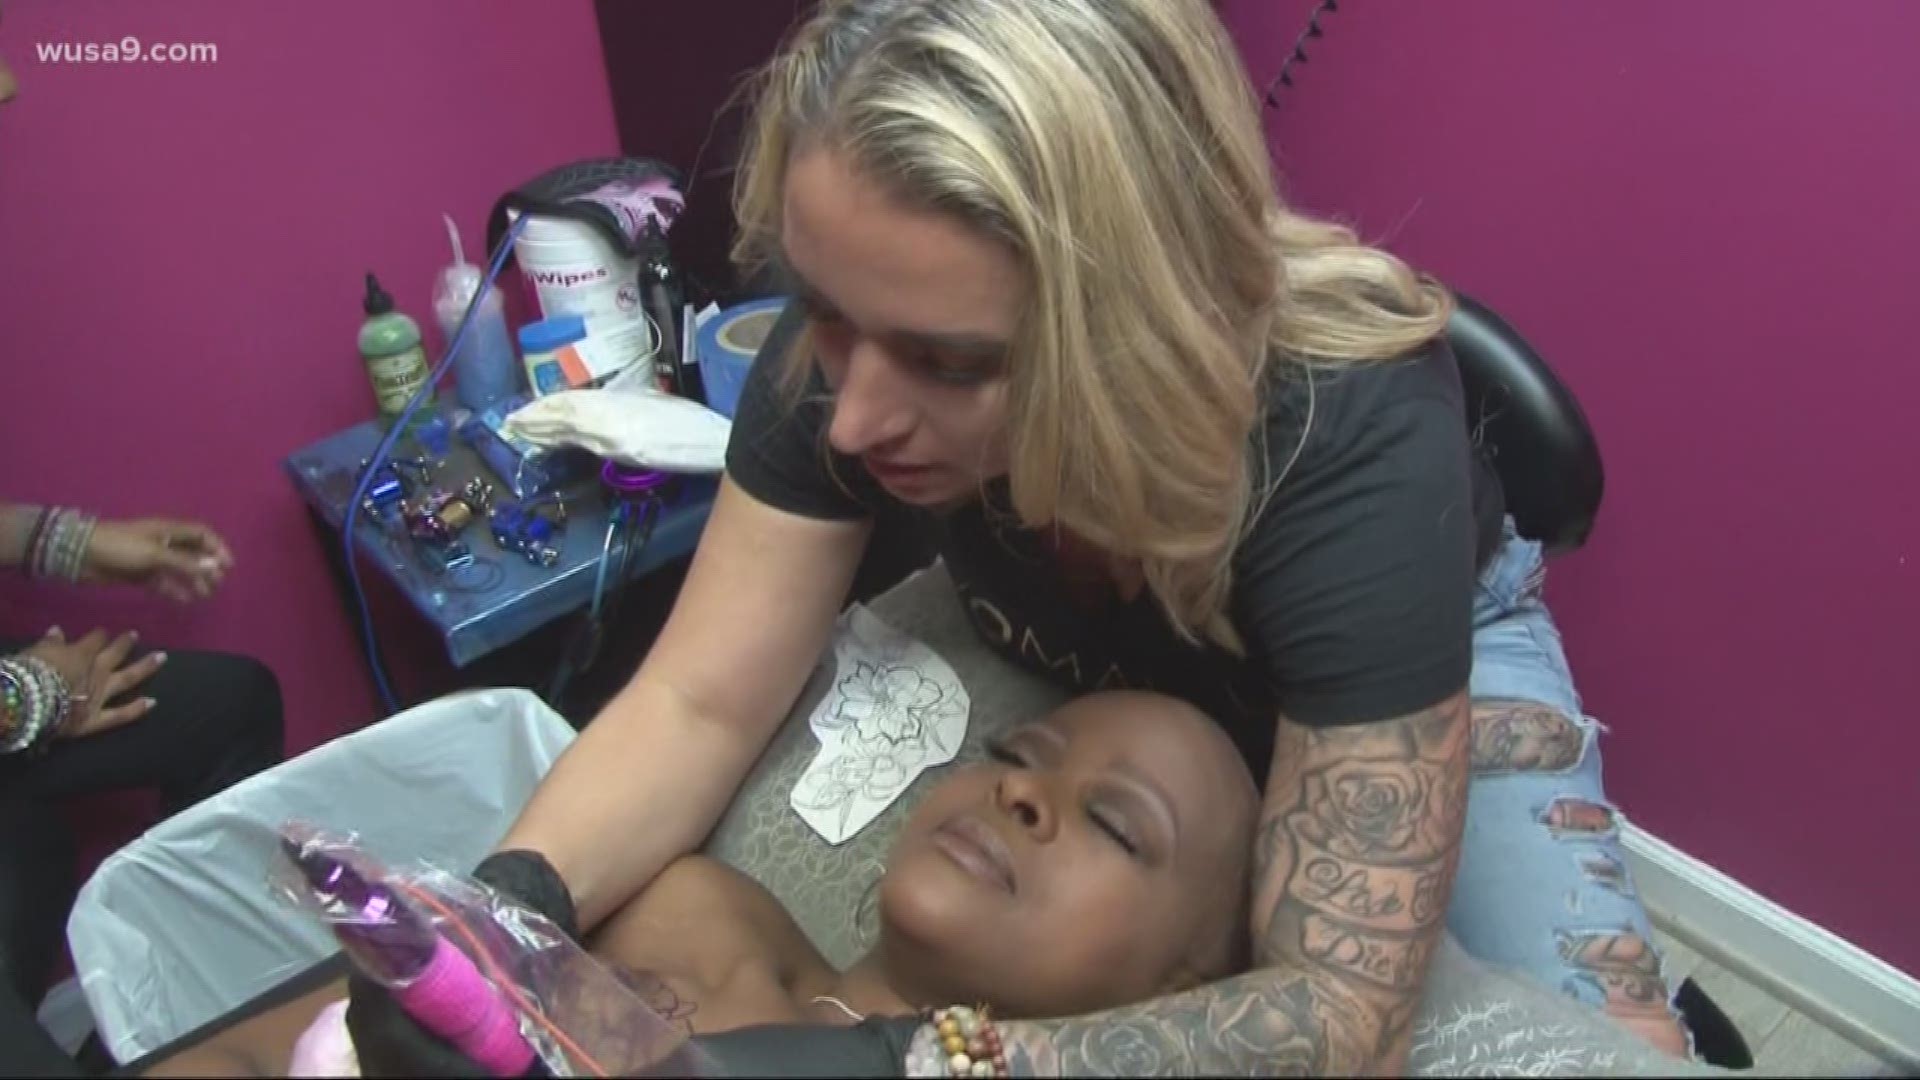 Two breast cancer survivors received a complimentary tattoo from a local, popular tattoo artist.